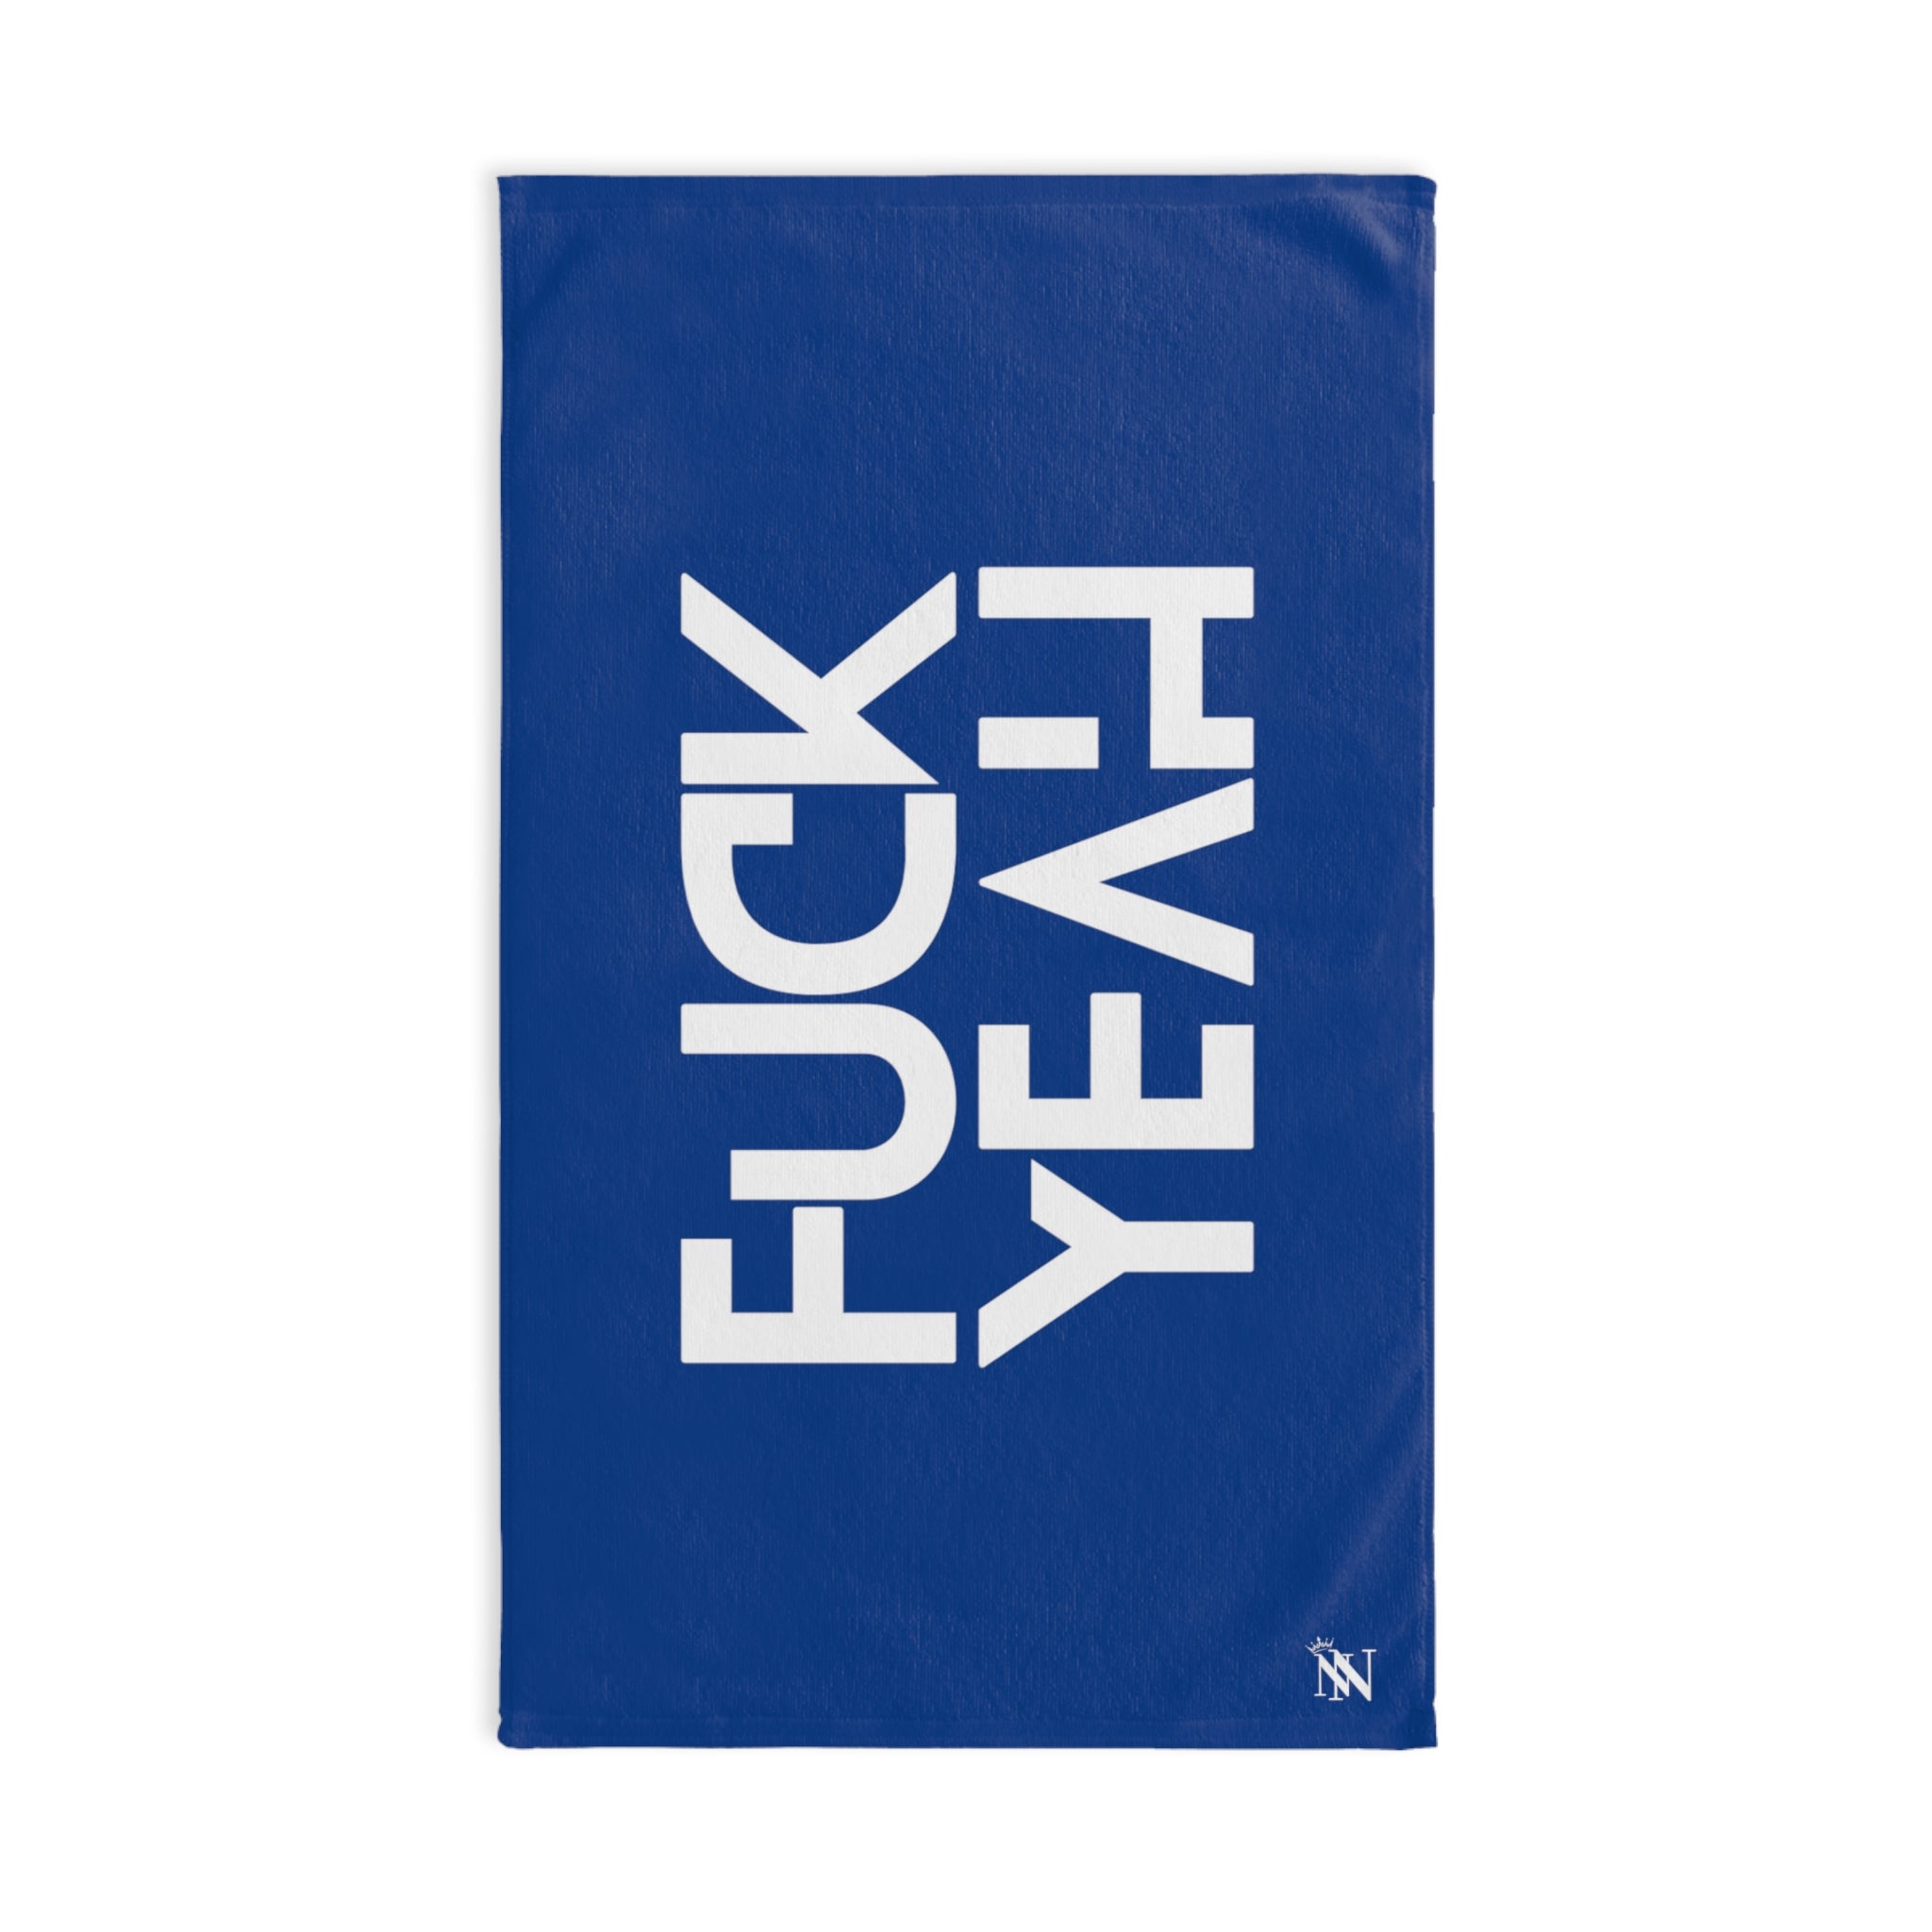 F*ck  White Yes YeahBlue | Gifts for Boyfriend, Funny Towel Romantic Gift for Wedding Couple Fiance First Year Anniversary Valentines, Party Gag Gifts, Joke Humor Cloth for Husband Men BF NECTAR NAPKINS